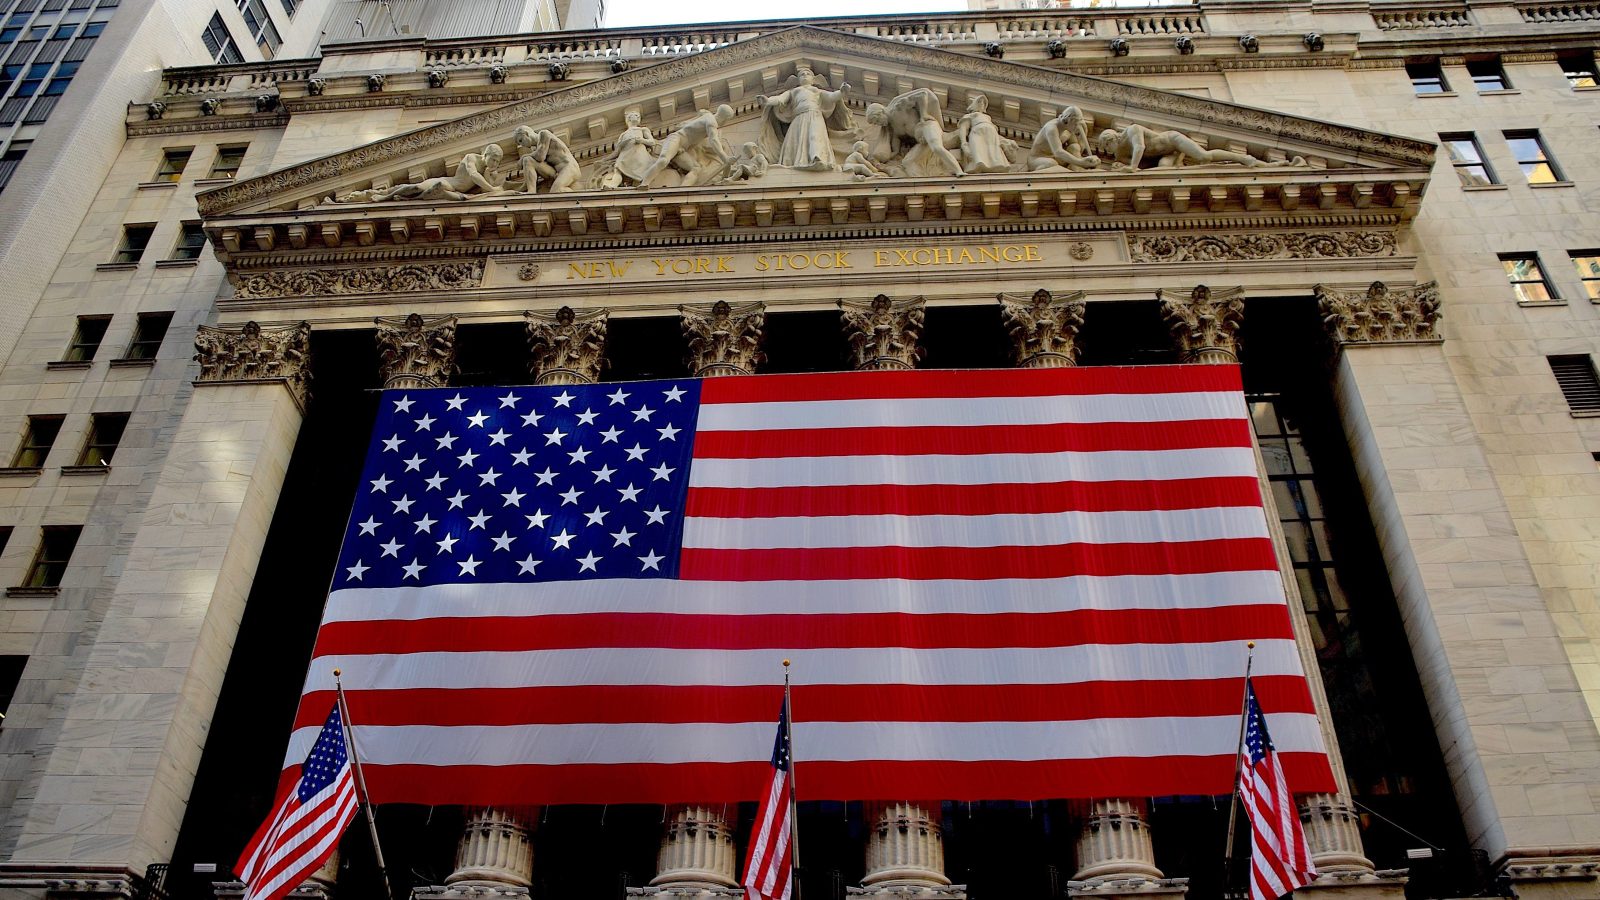 New York Stock Exchange with US flags